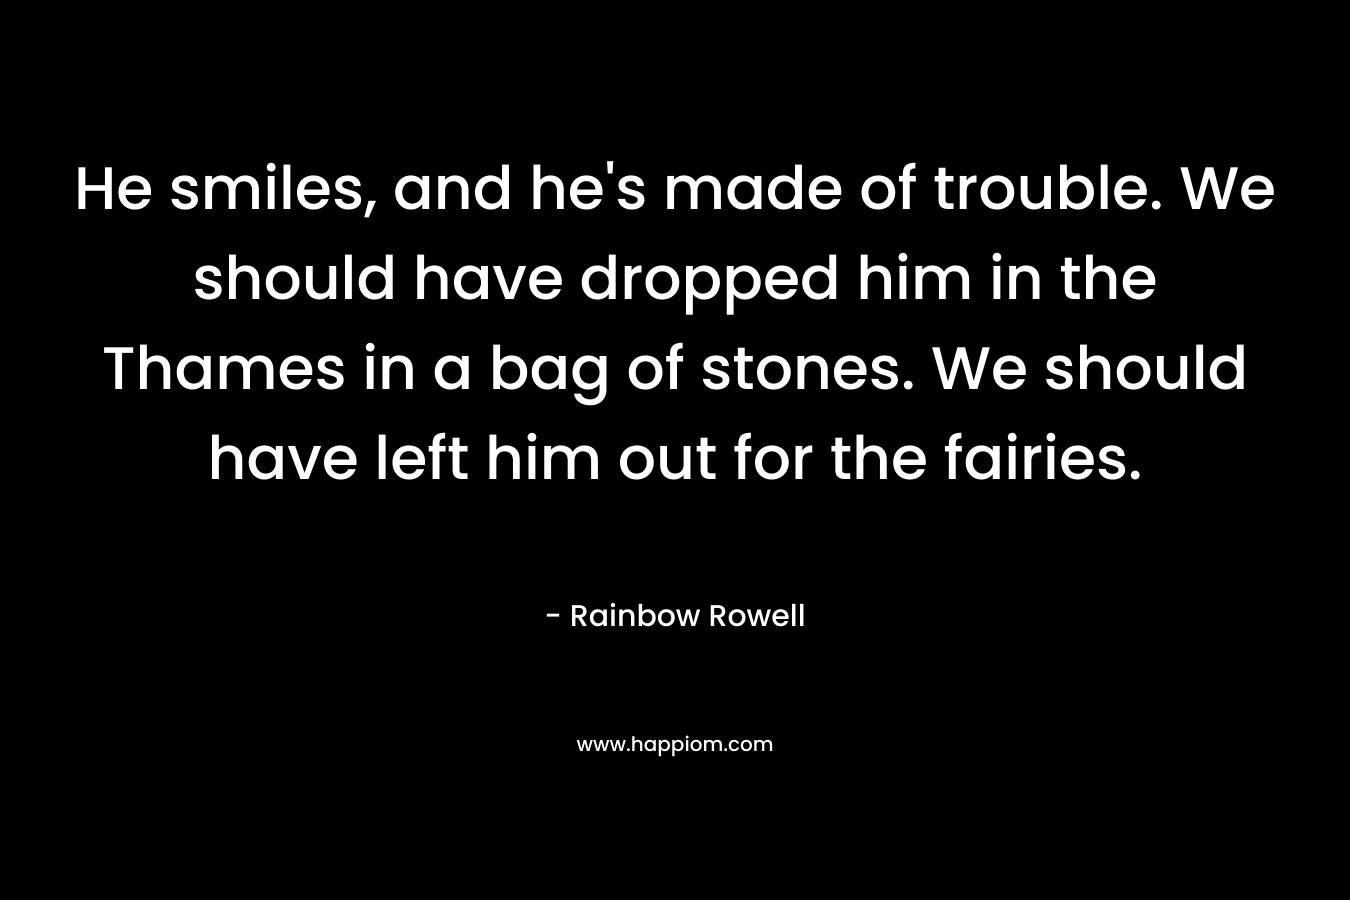 He smiles, and he’s made of trouble. We should have dropped him in the Thames in a bag of stones. We should have left him out for the fairies. – Rainbow Rowell